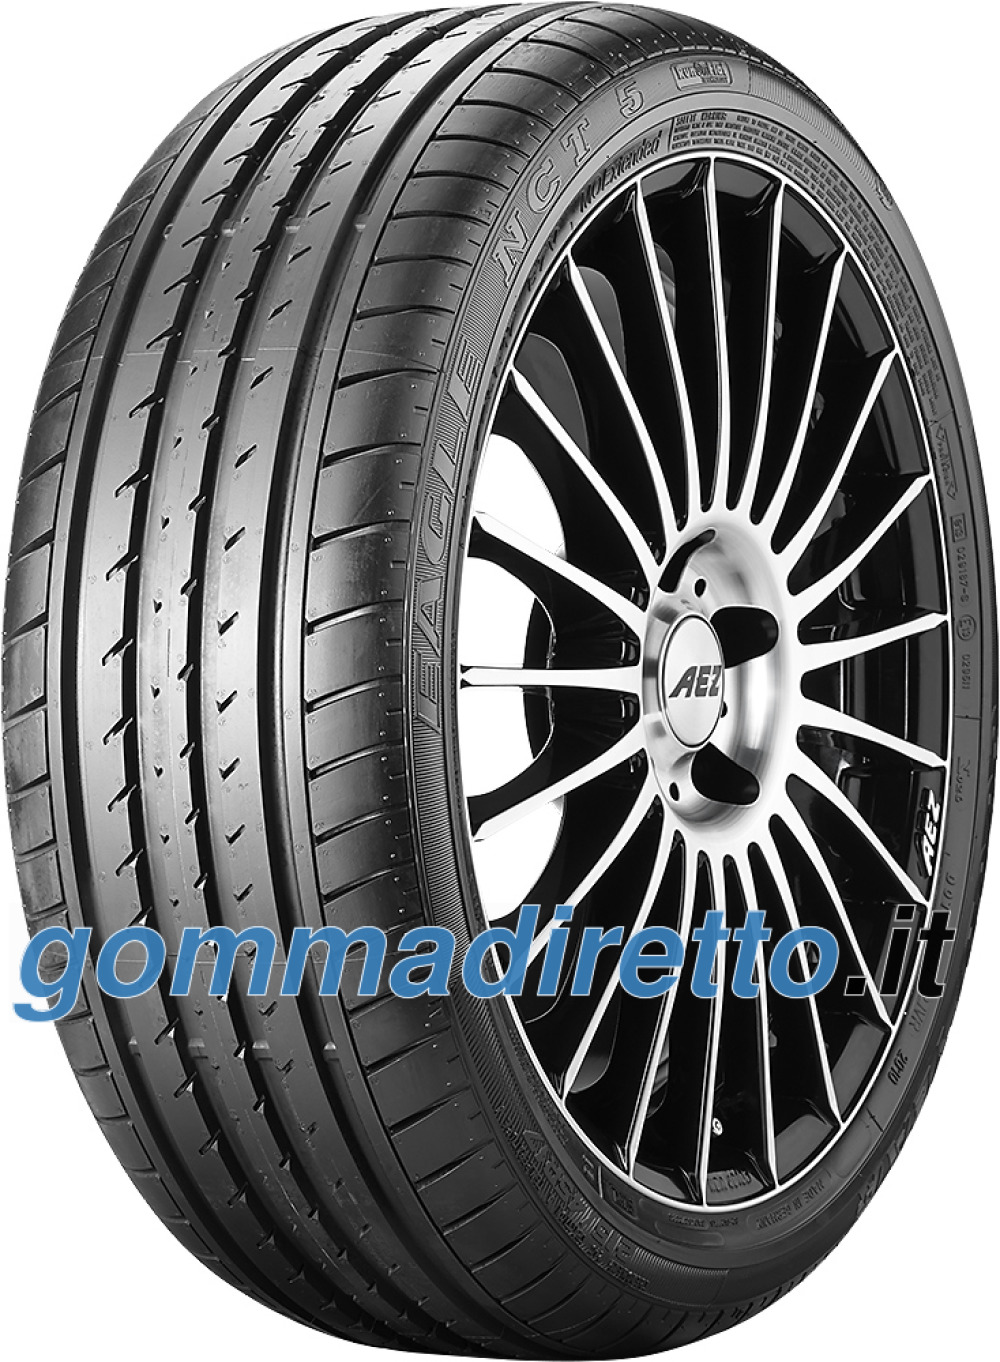 Image of Goodyear Eagle NCT 5 ROF ( 245/45 R17 95Y *, runflat )